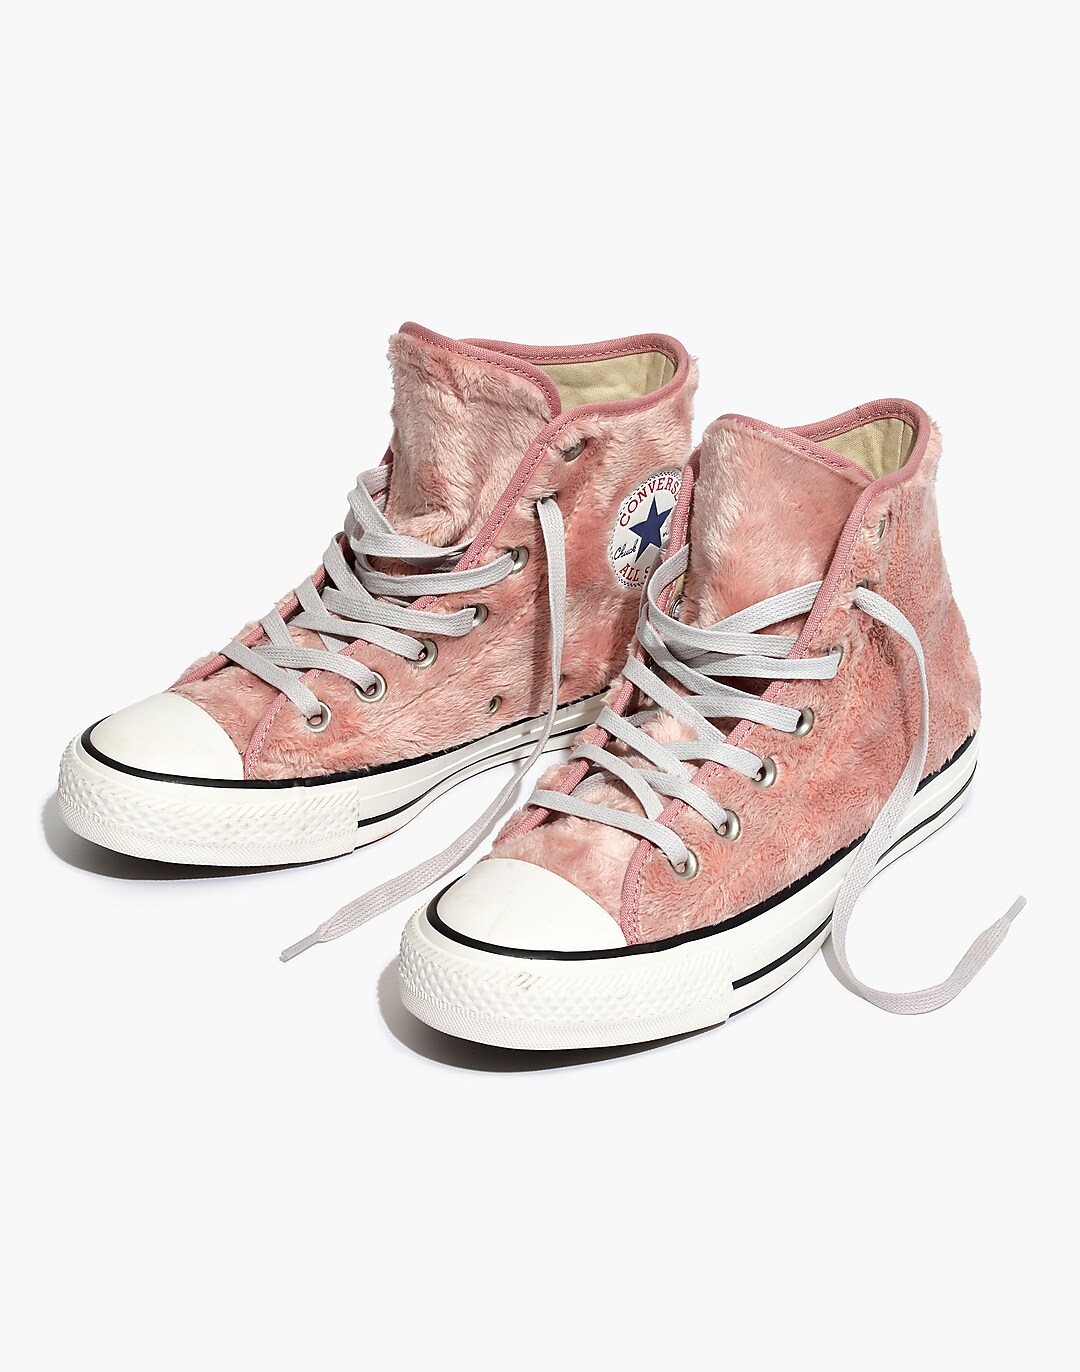 Converse® Chuck All Star High-Top Sneakers in Faux Fur